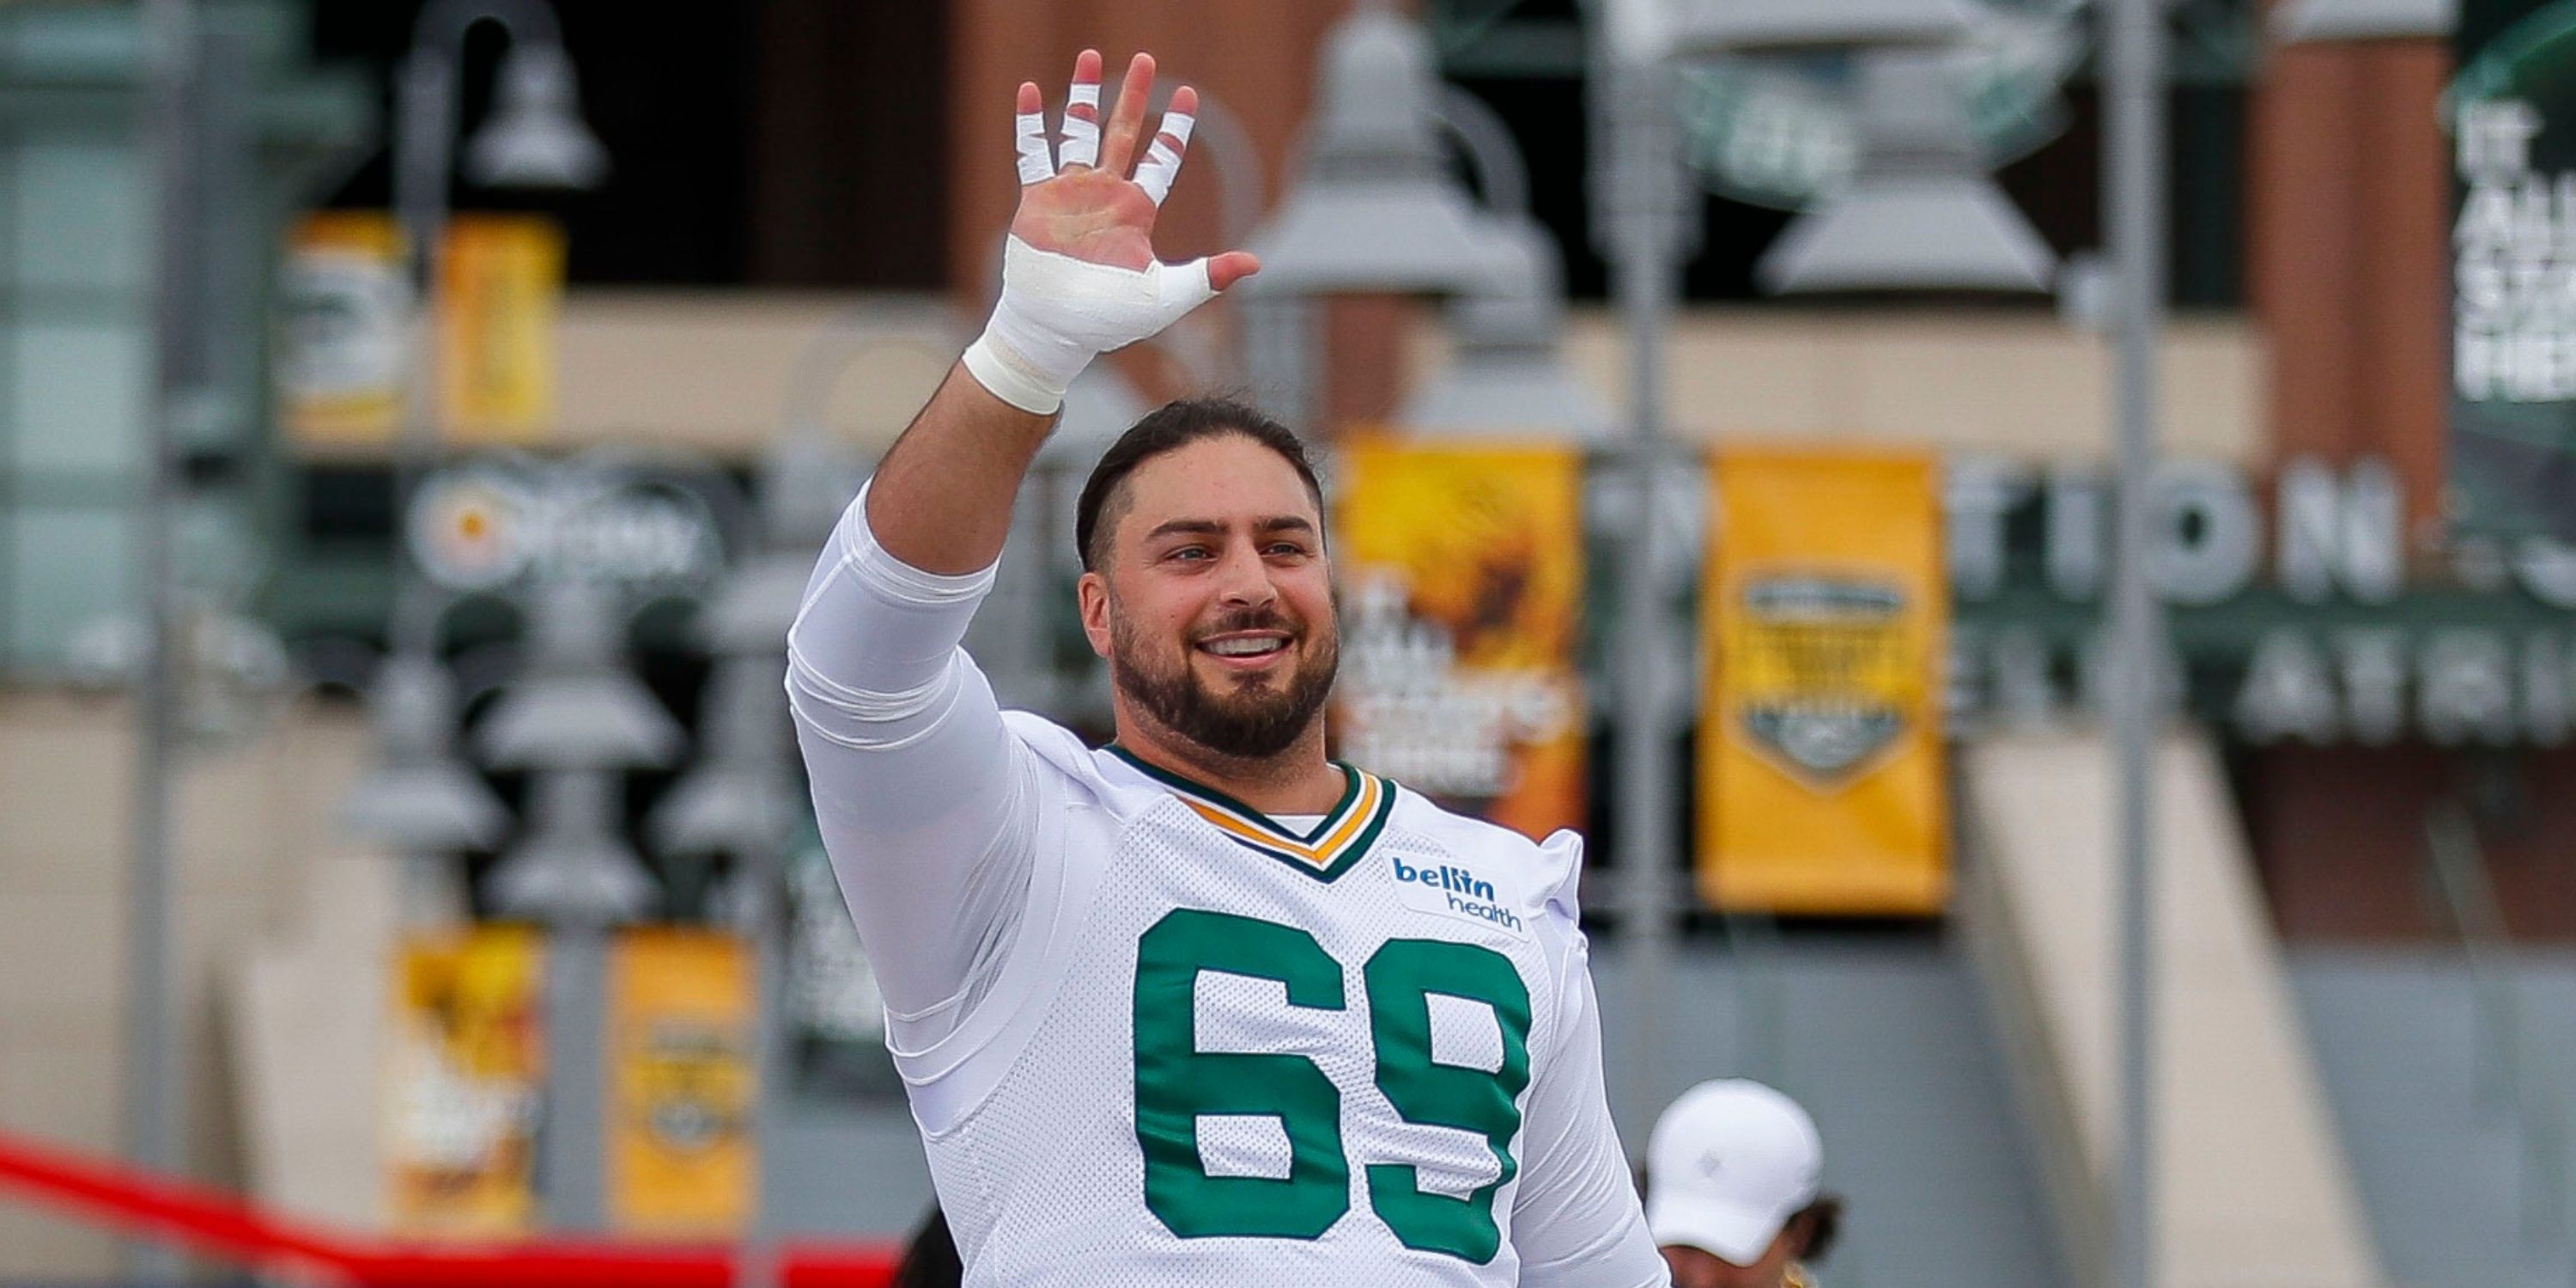 David Bakhtiari waves to fans at Packers' event